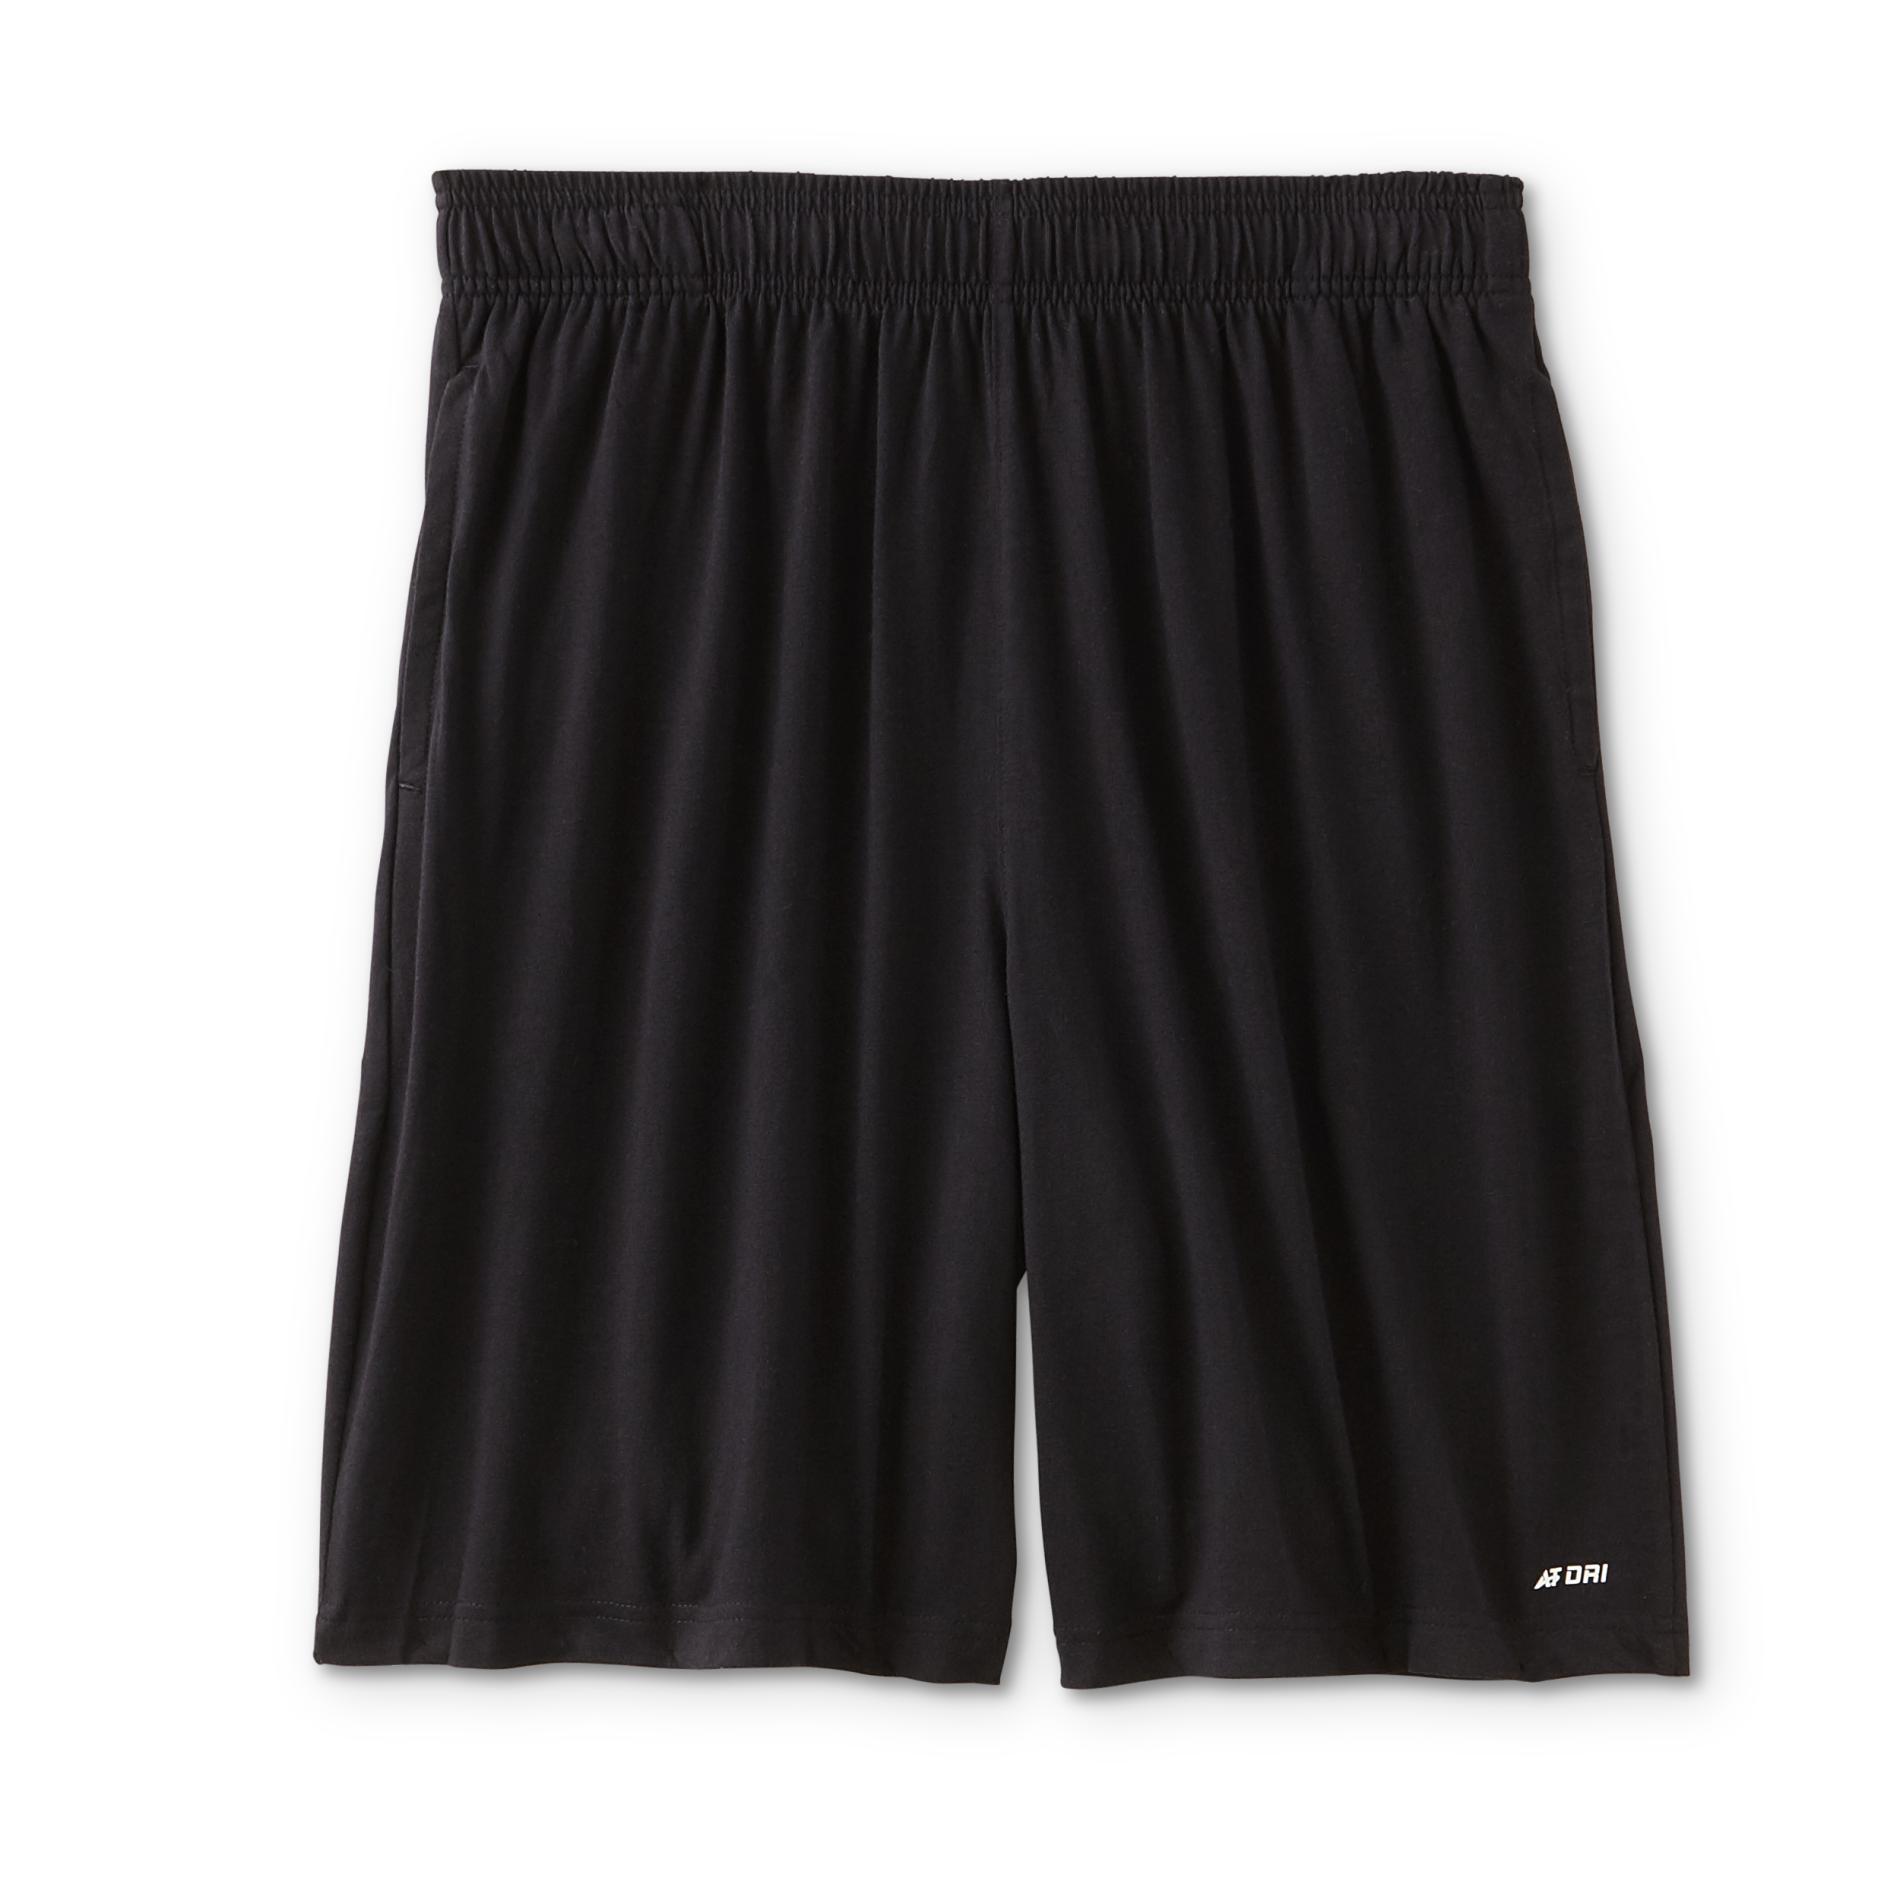 Athletech Men's Big & Tall Athletic Shorts | Shop Your Way: Online ...